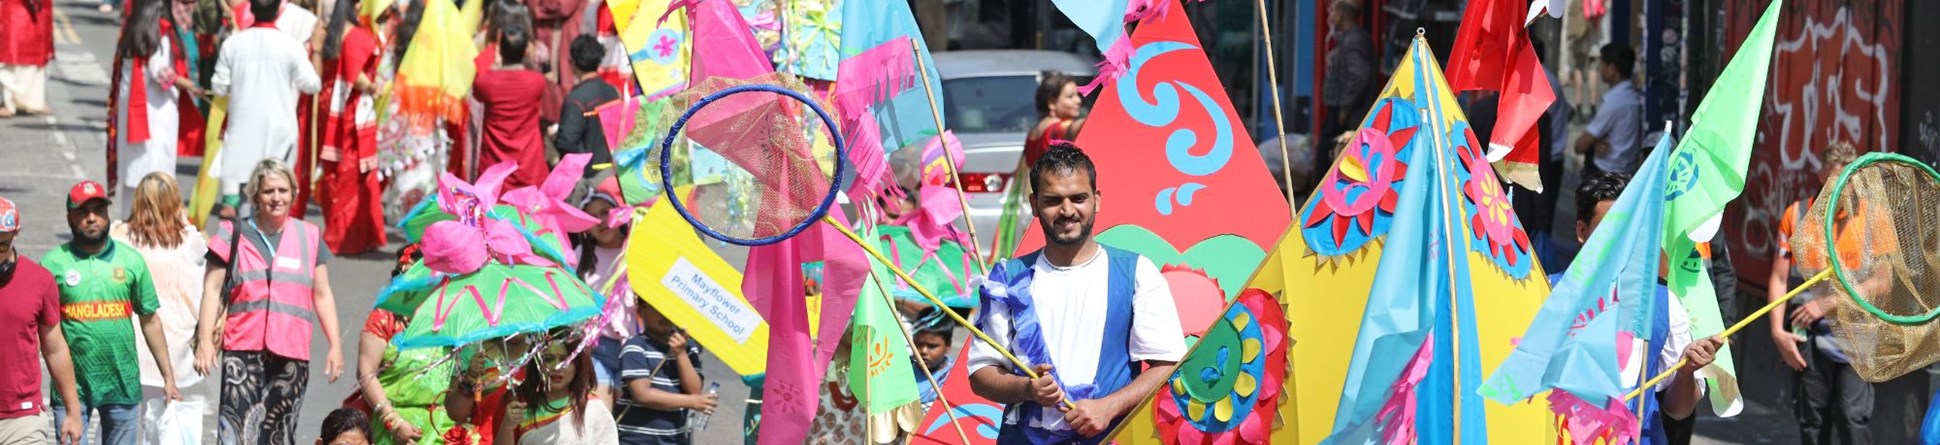 A carnival parade makes its way up a road. People wear colourful clothing, and carry flags. At the head of the procession a man walks inside a boat made of fabric stretched around a frame.